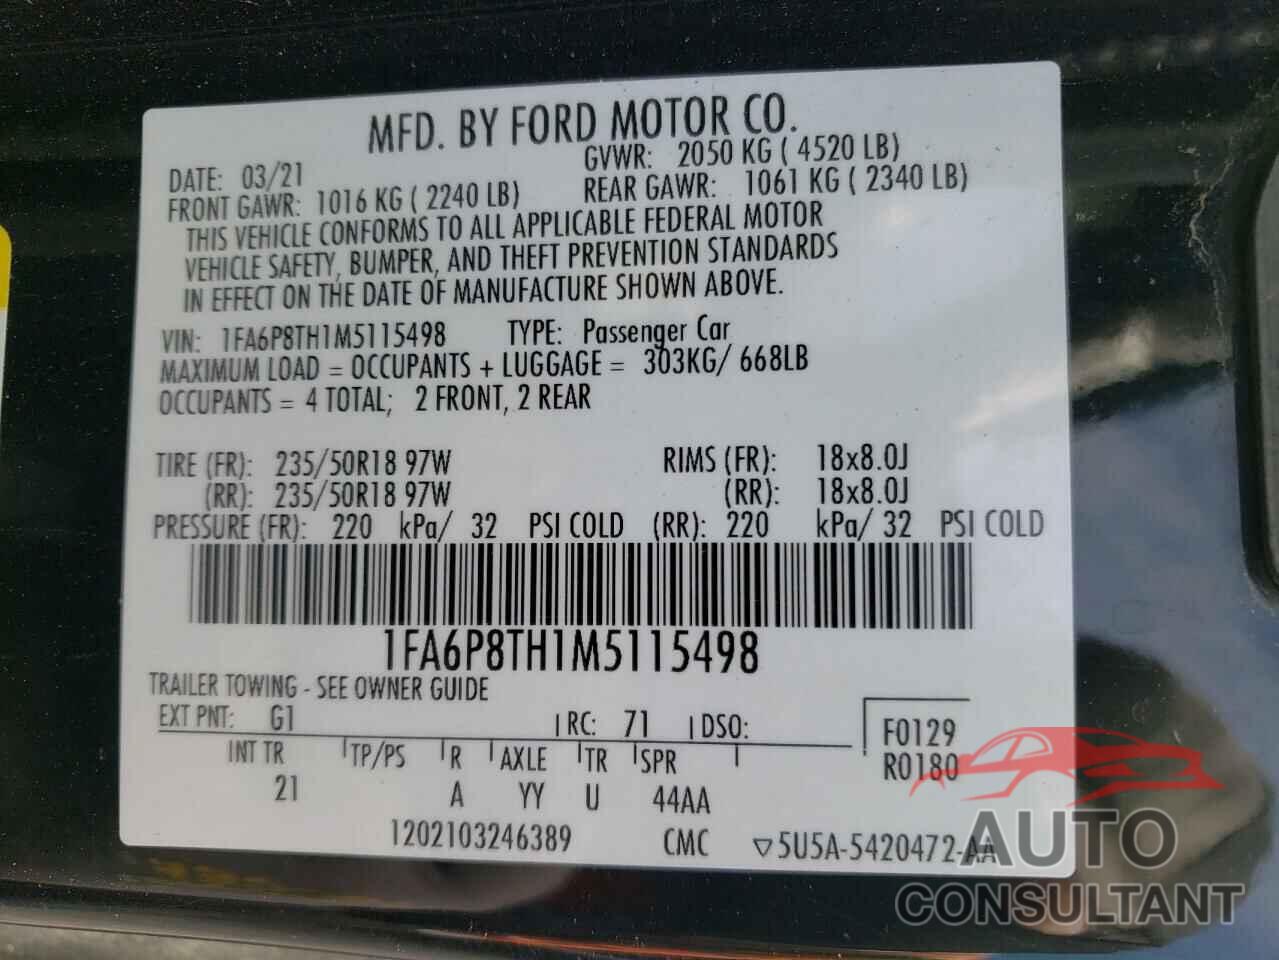 FORD ALL Models 2021 - 1FA6P8TH1M5115498